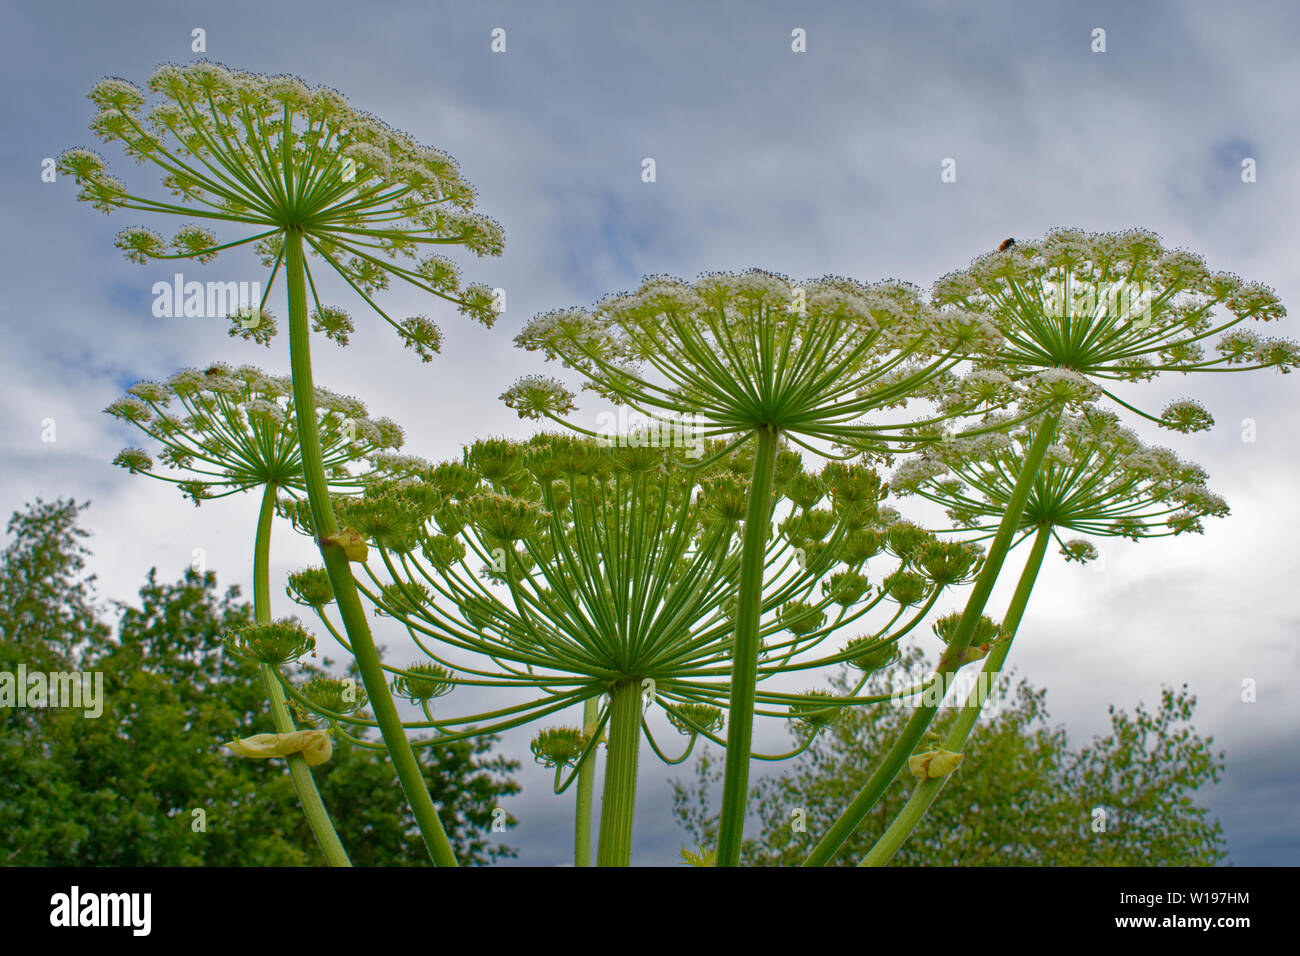 RIVER FINDHORN  SCOTLAND EARLY SUMMER FLOWERS OF THE GIANT HOGWEED Heracleum mantegazzianum AGAINST CLOUDS IN A SUMMER SKY Stock Photo